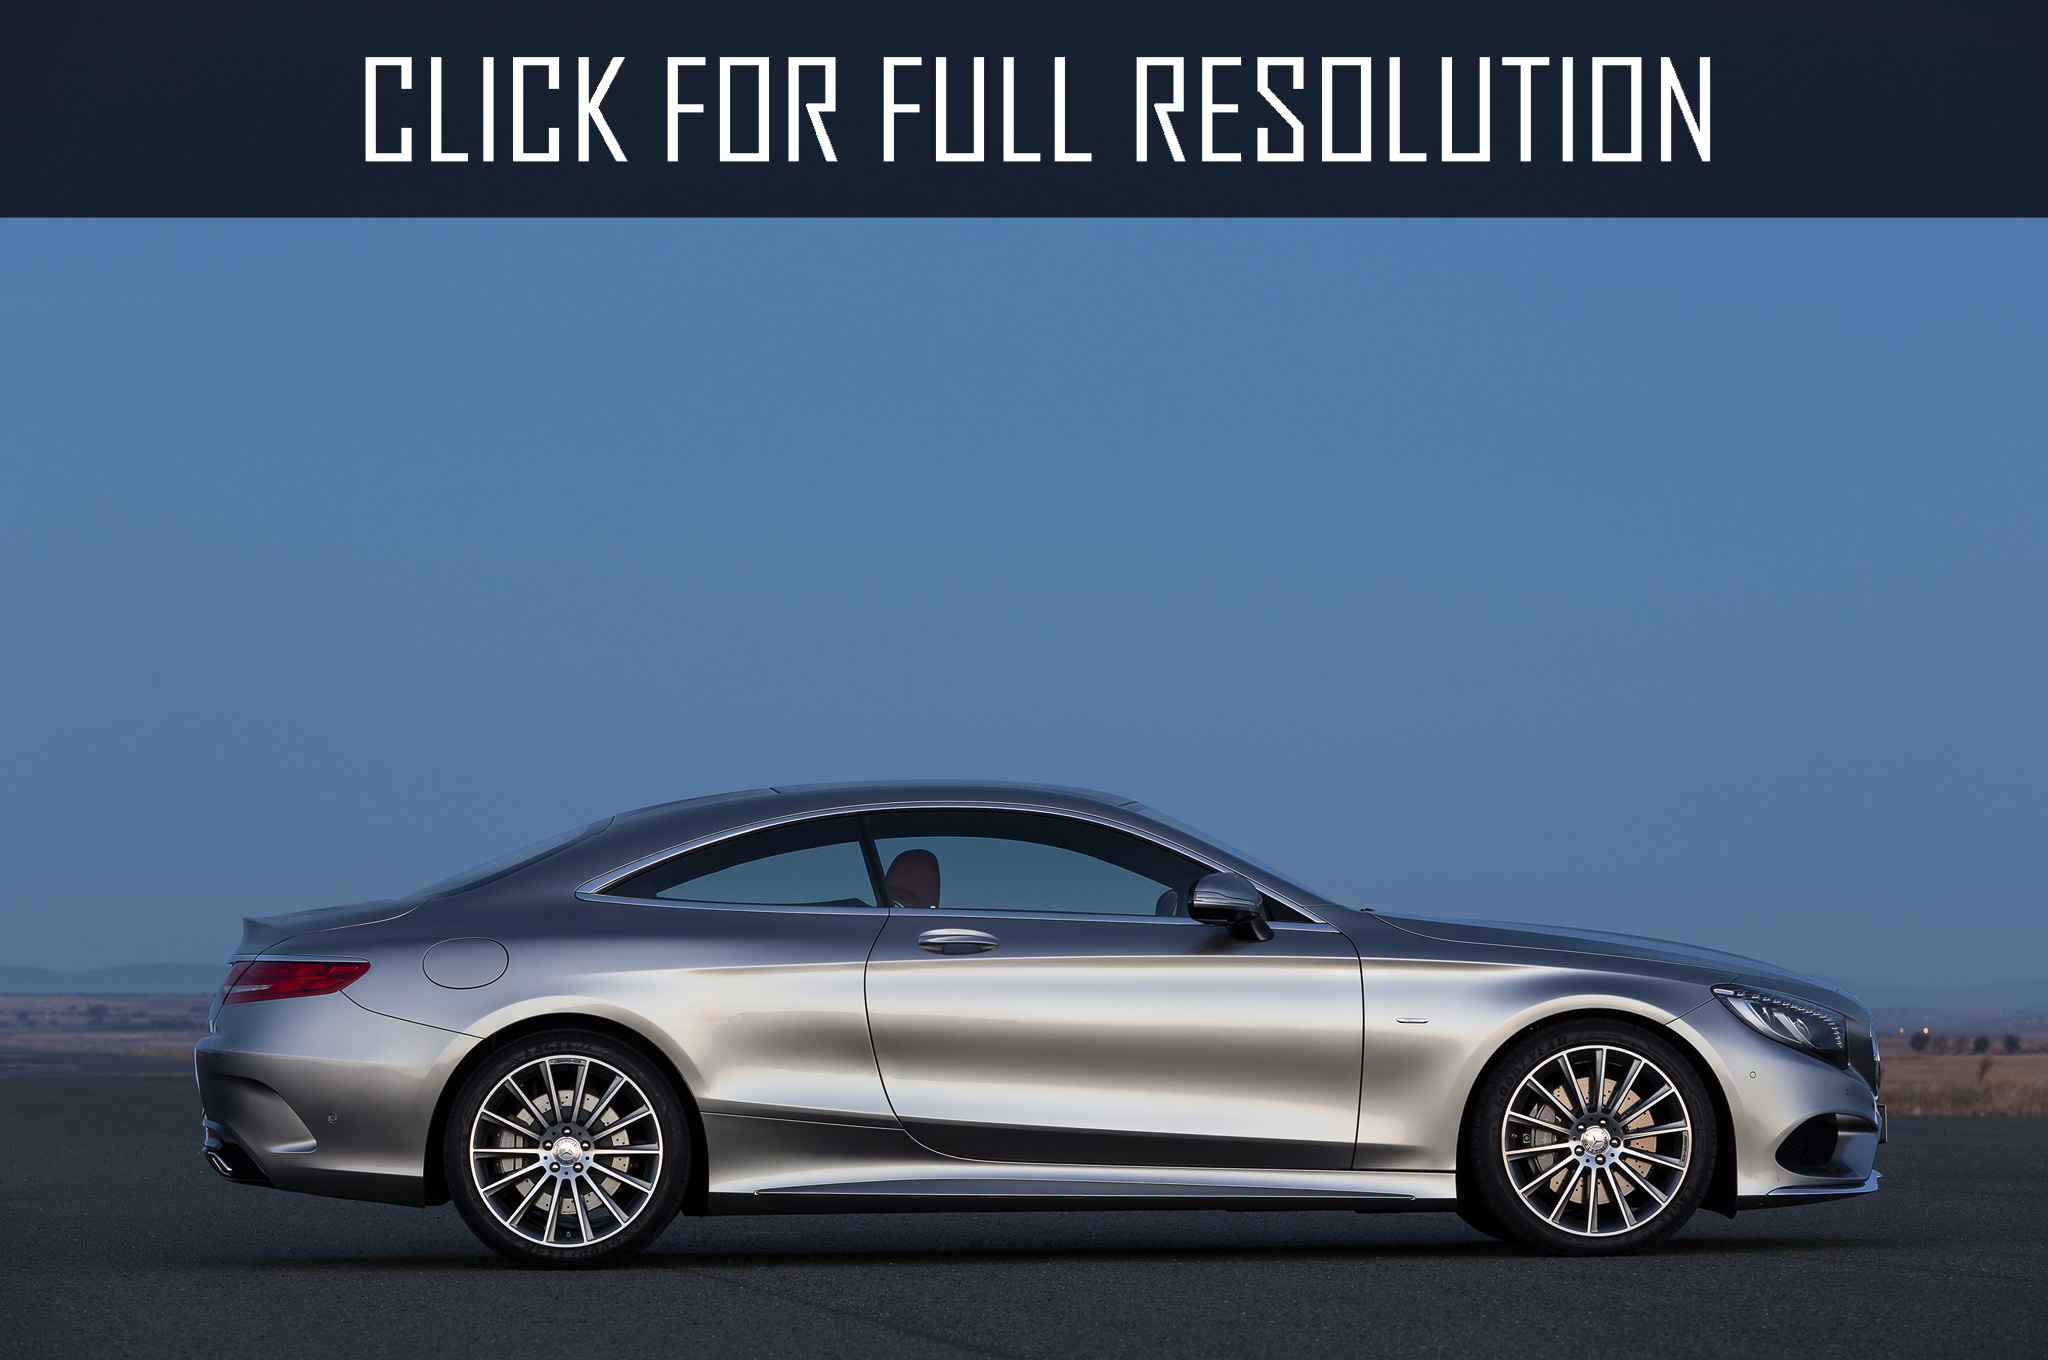 Mercedes Benz S550 Coupe 2015